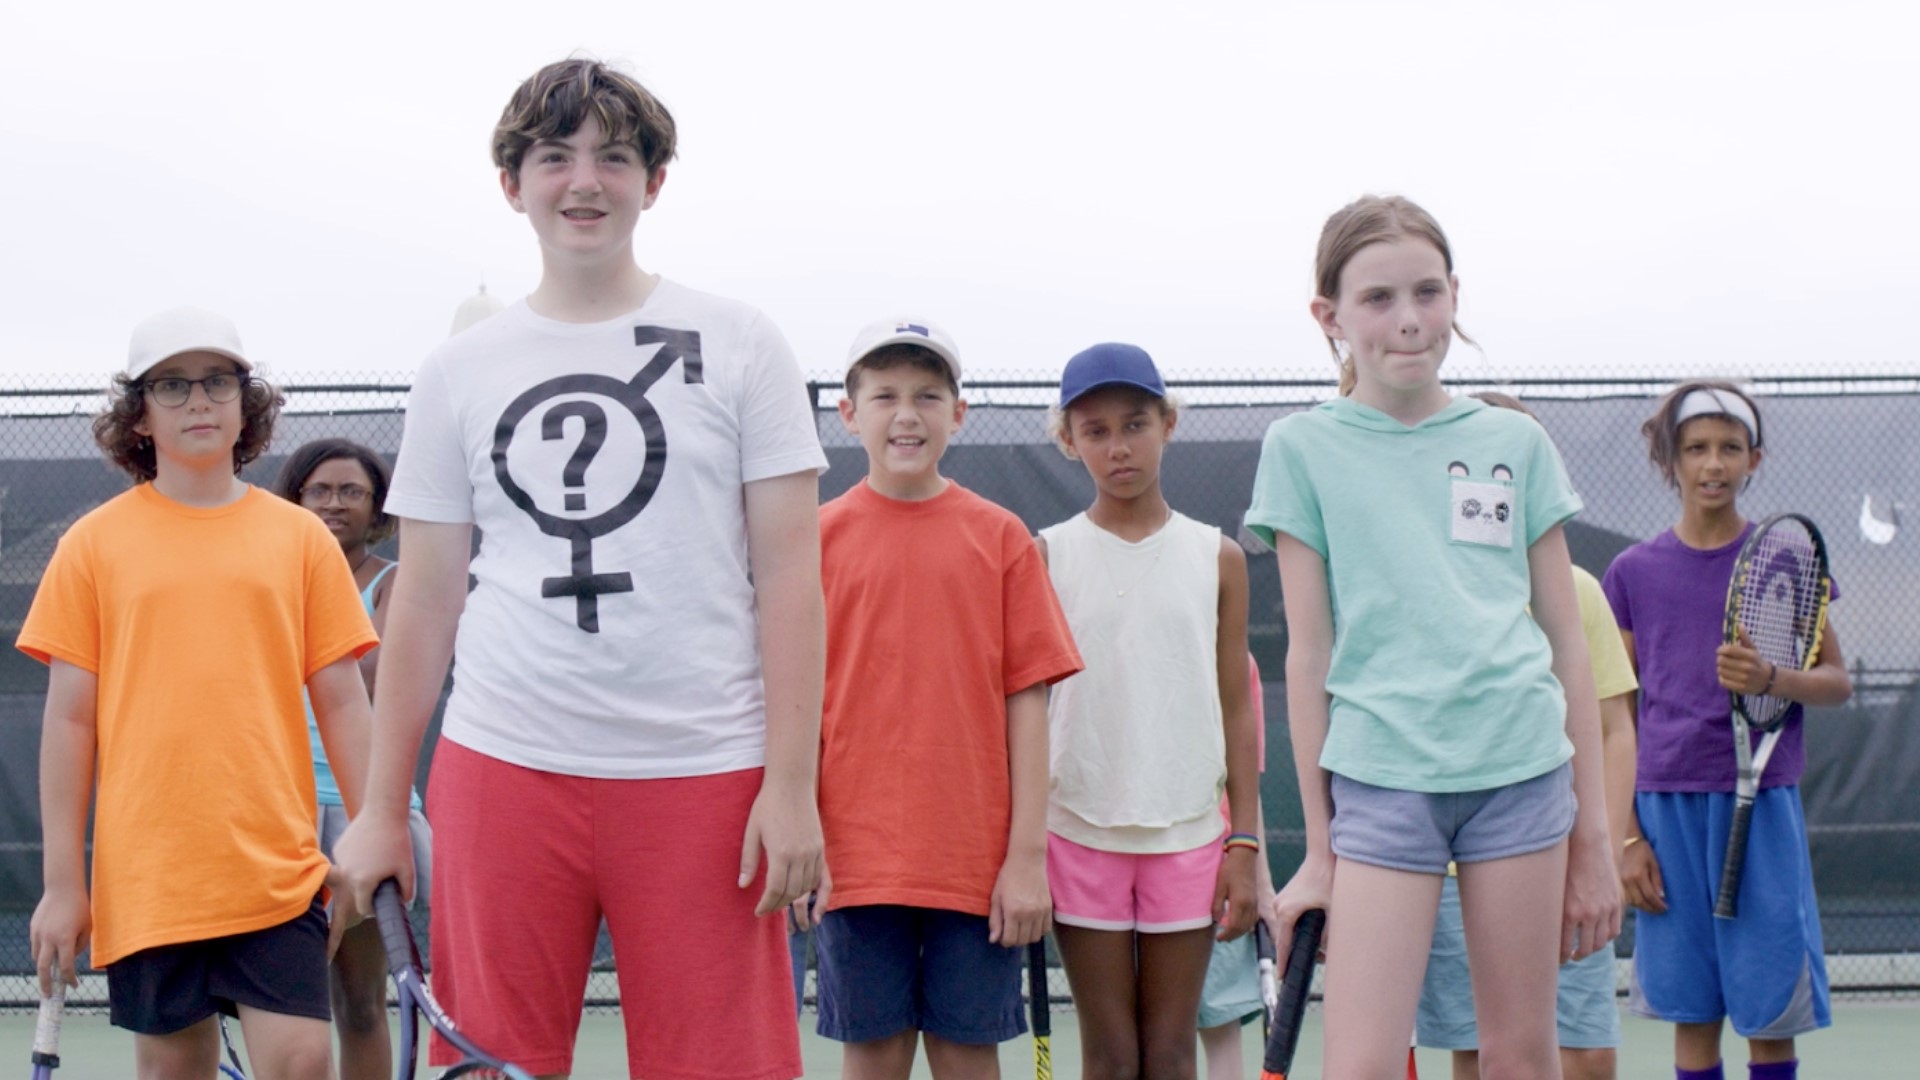 'Bay Creek Tennis Camp' is a short film about kids who stand up for their rights.